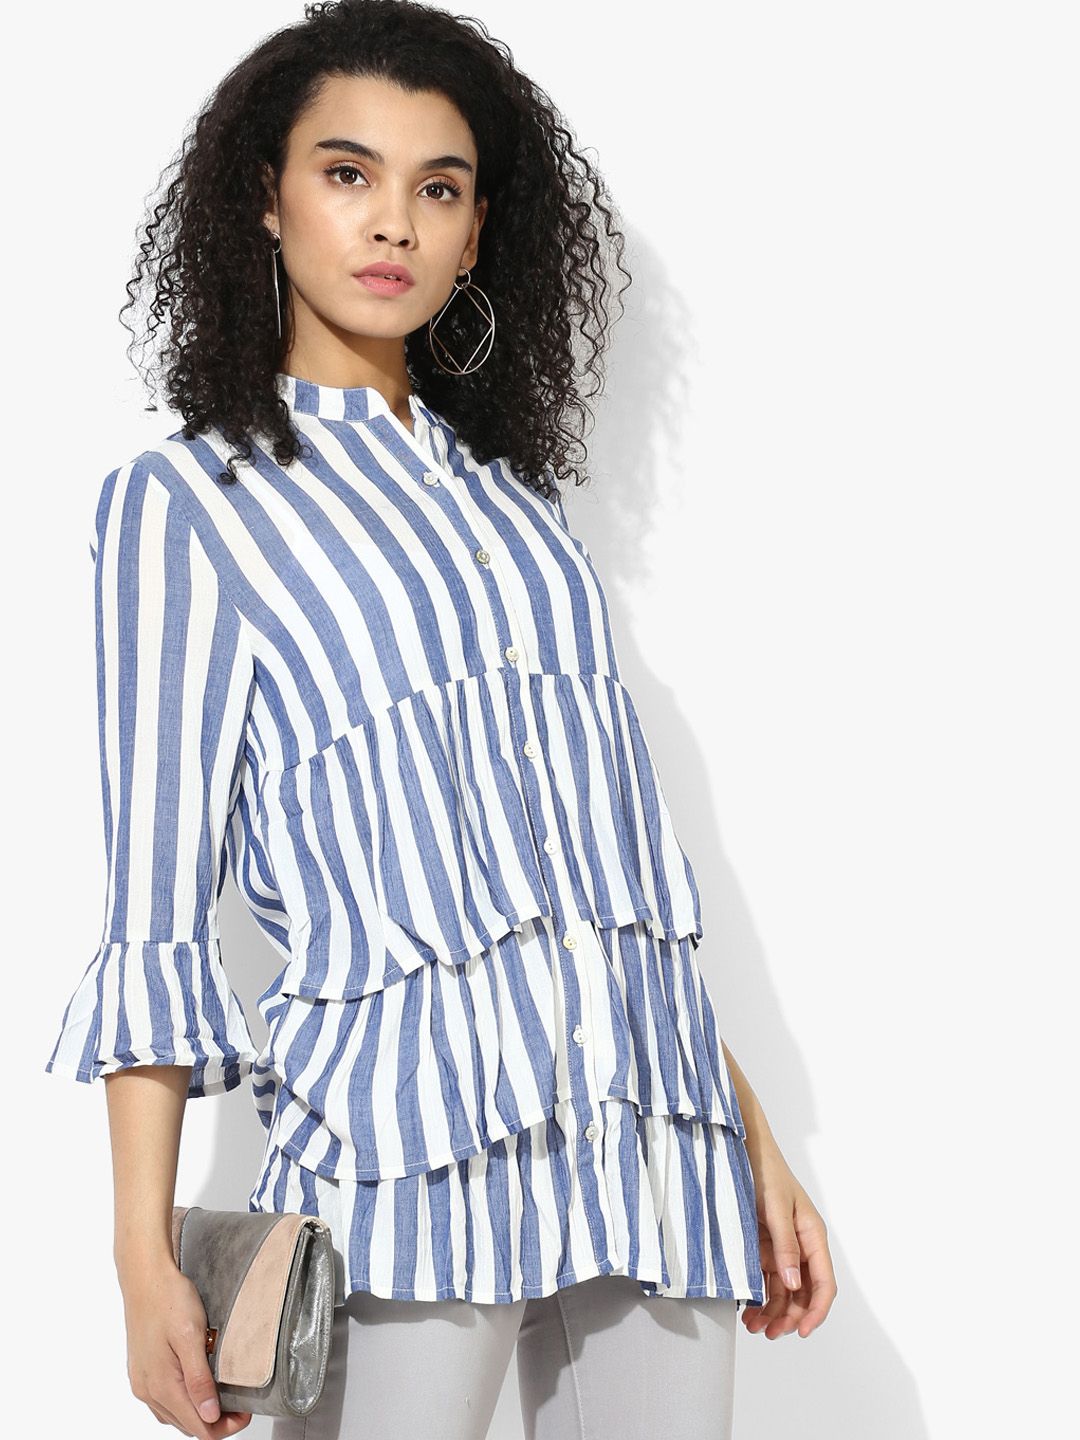 Pepe Jeans Women Blue & White Striped Shirt Style Top Price in India